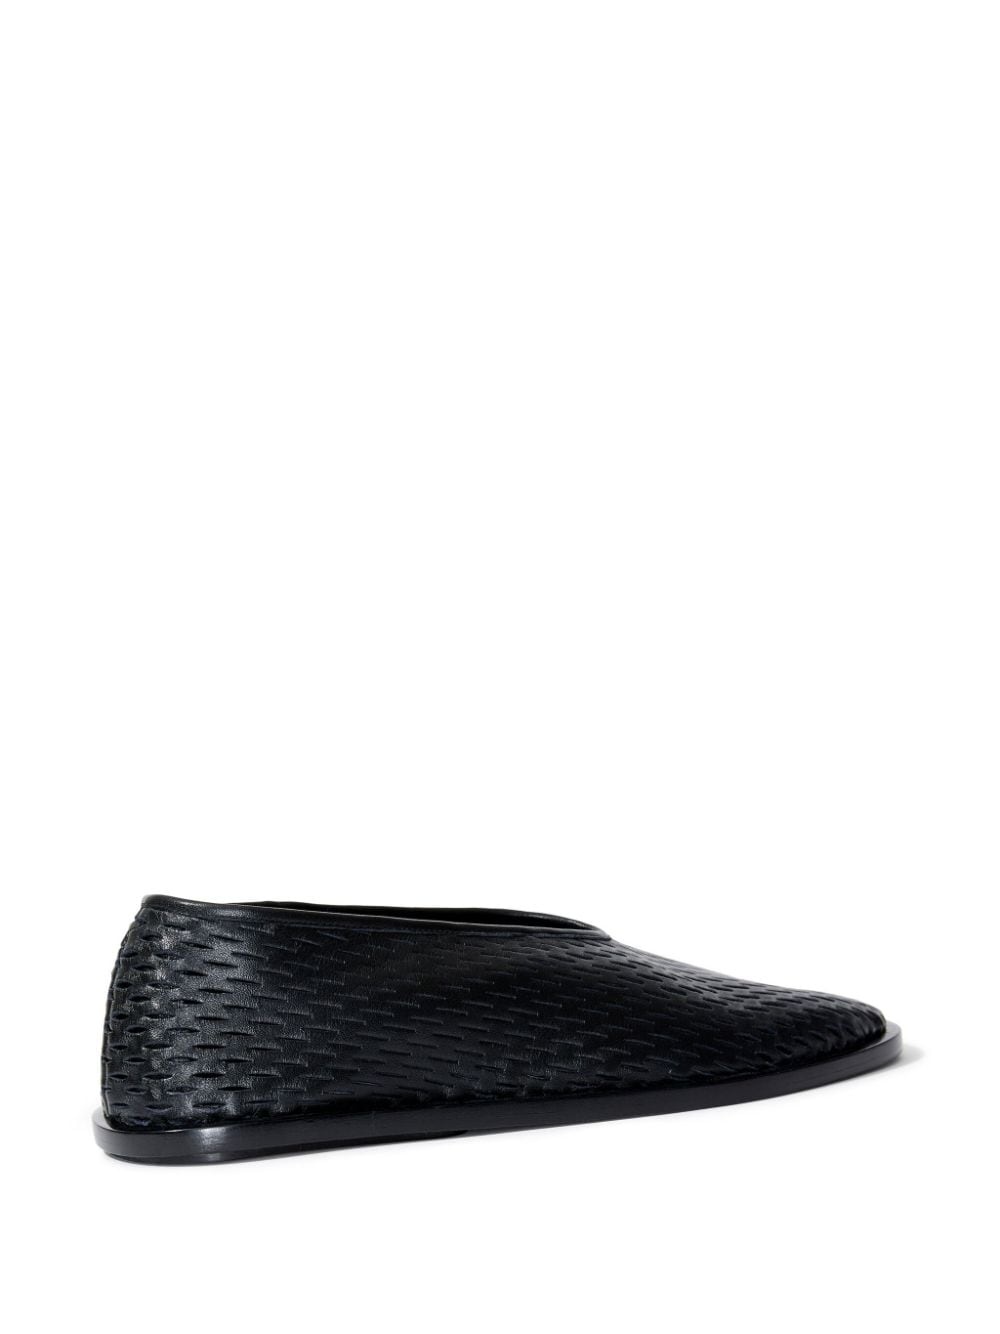 square perforated slippers - 3